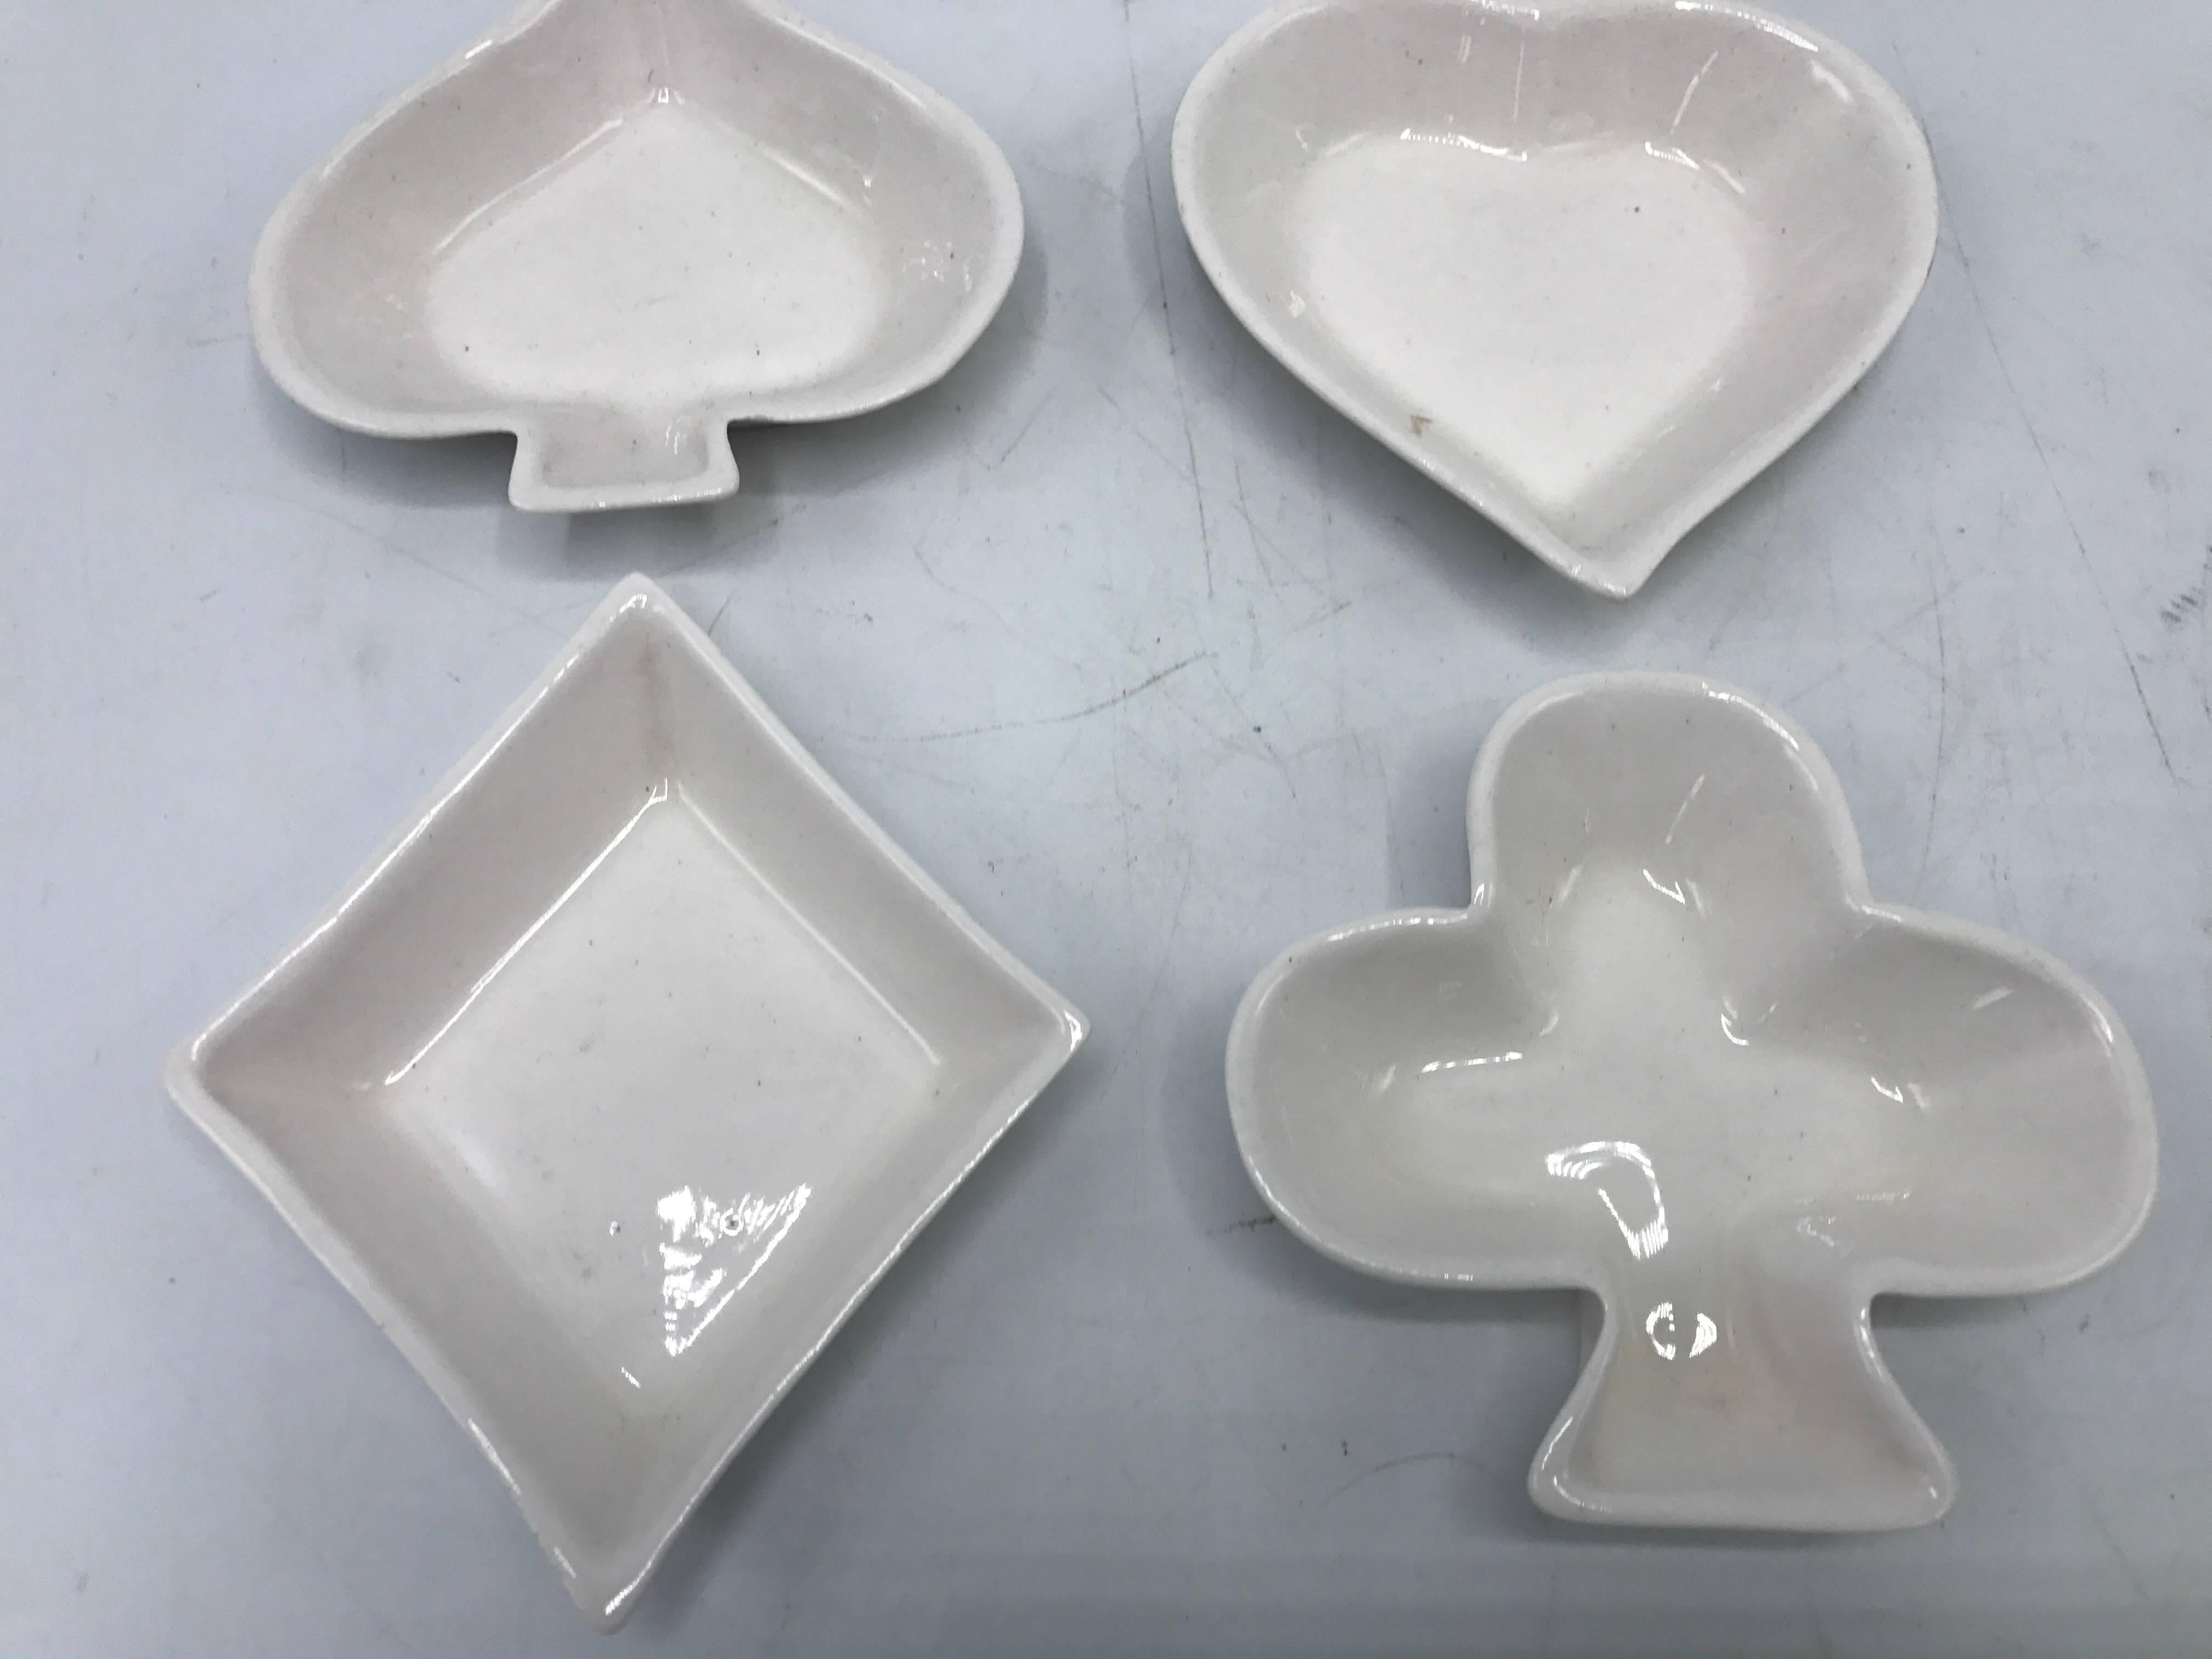 Offered is a gorgeous, set of four, 1960s white porcelain playing card suits decorative dishes. One of each; spade, heart, diamond and club. Marked: Royal Ardalt. Made in England.